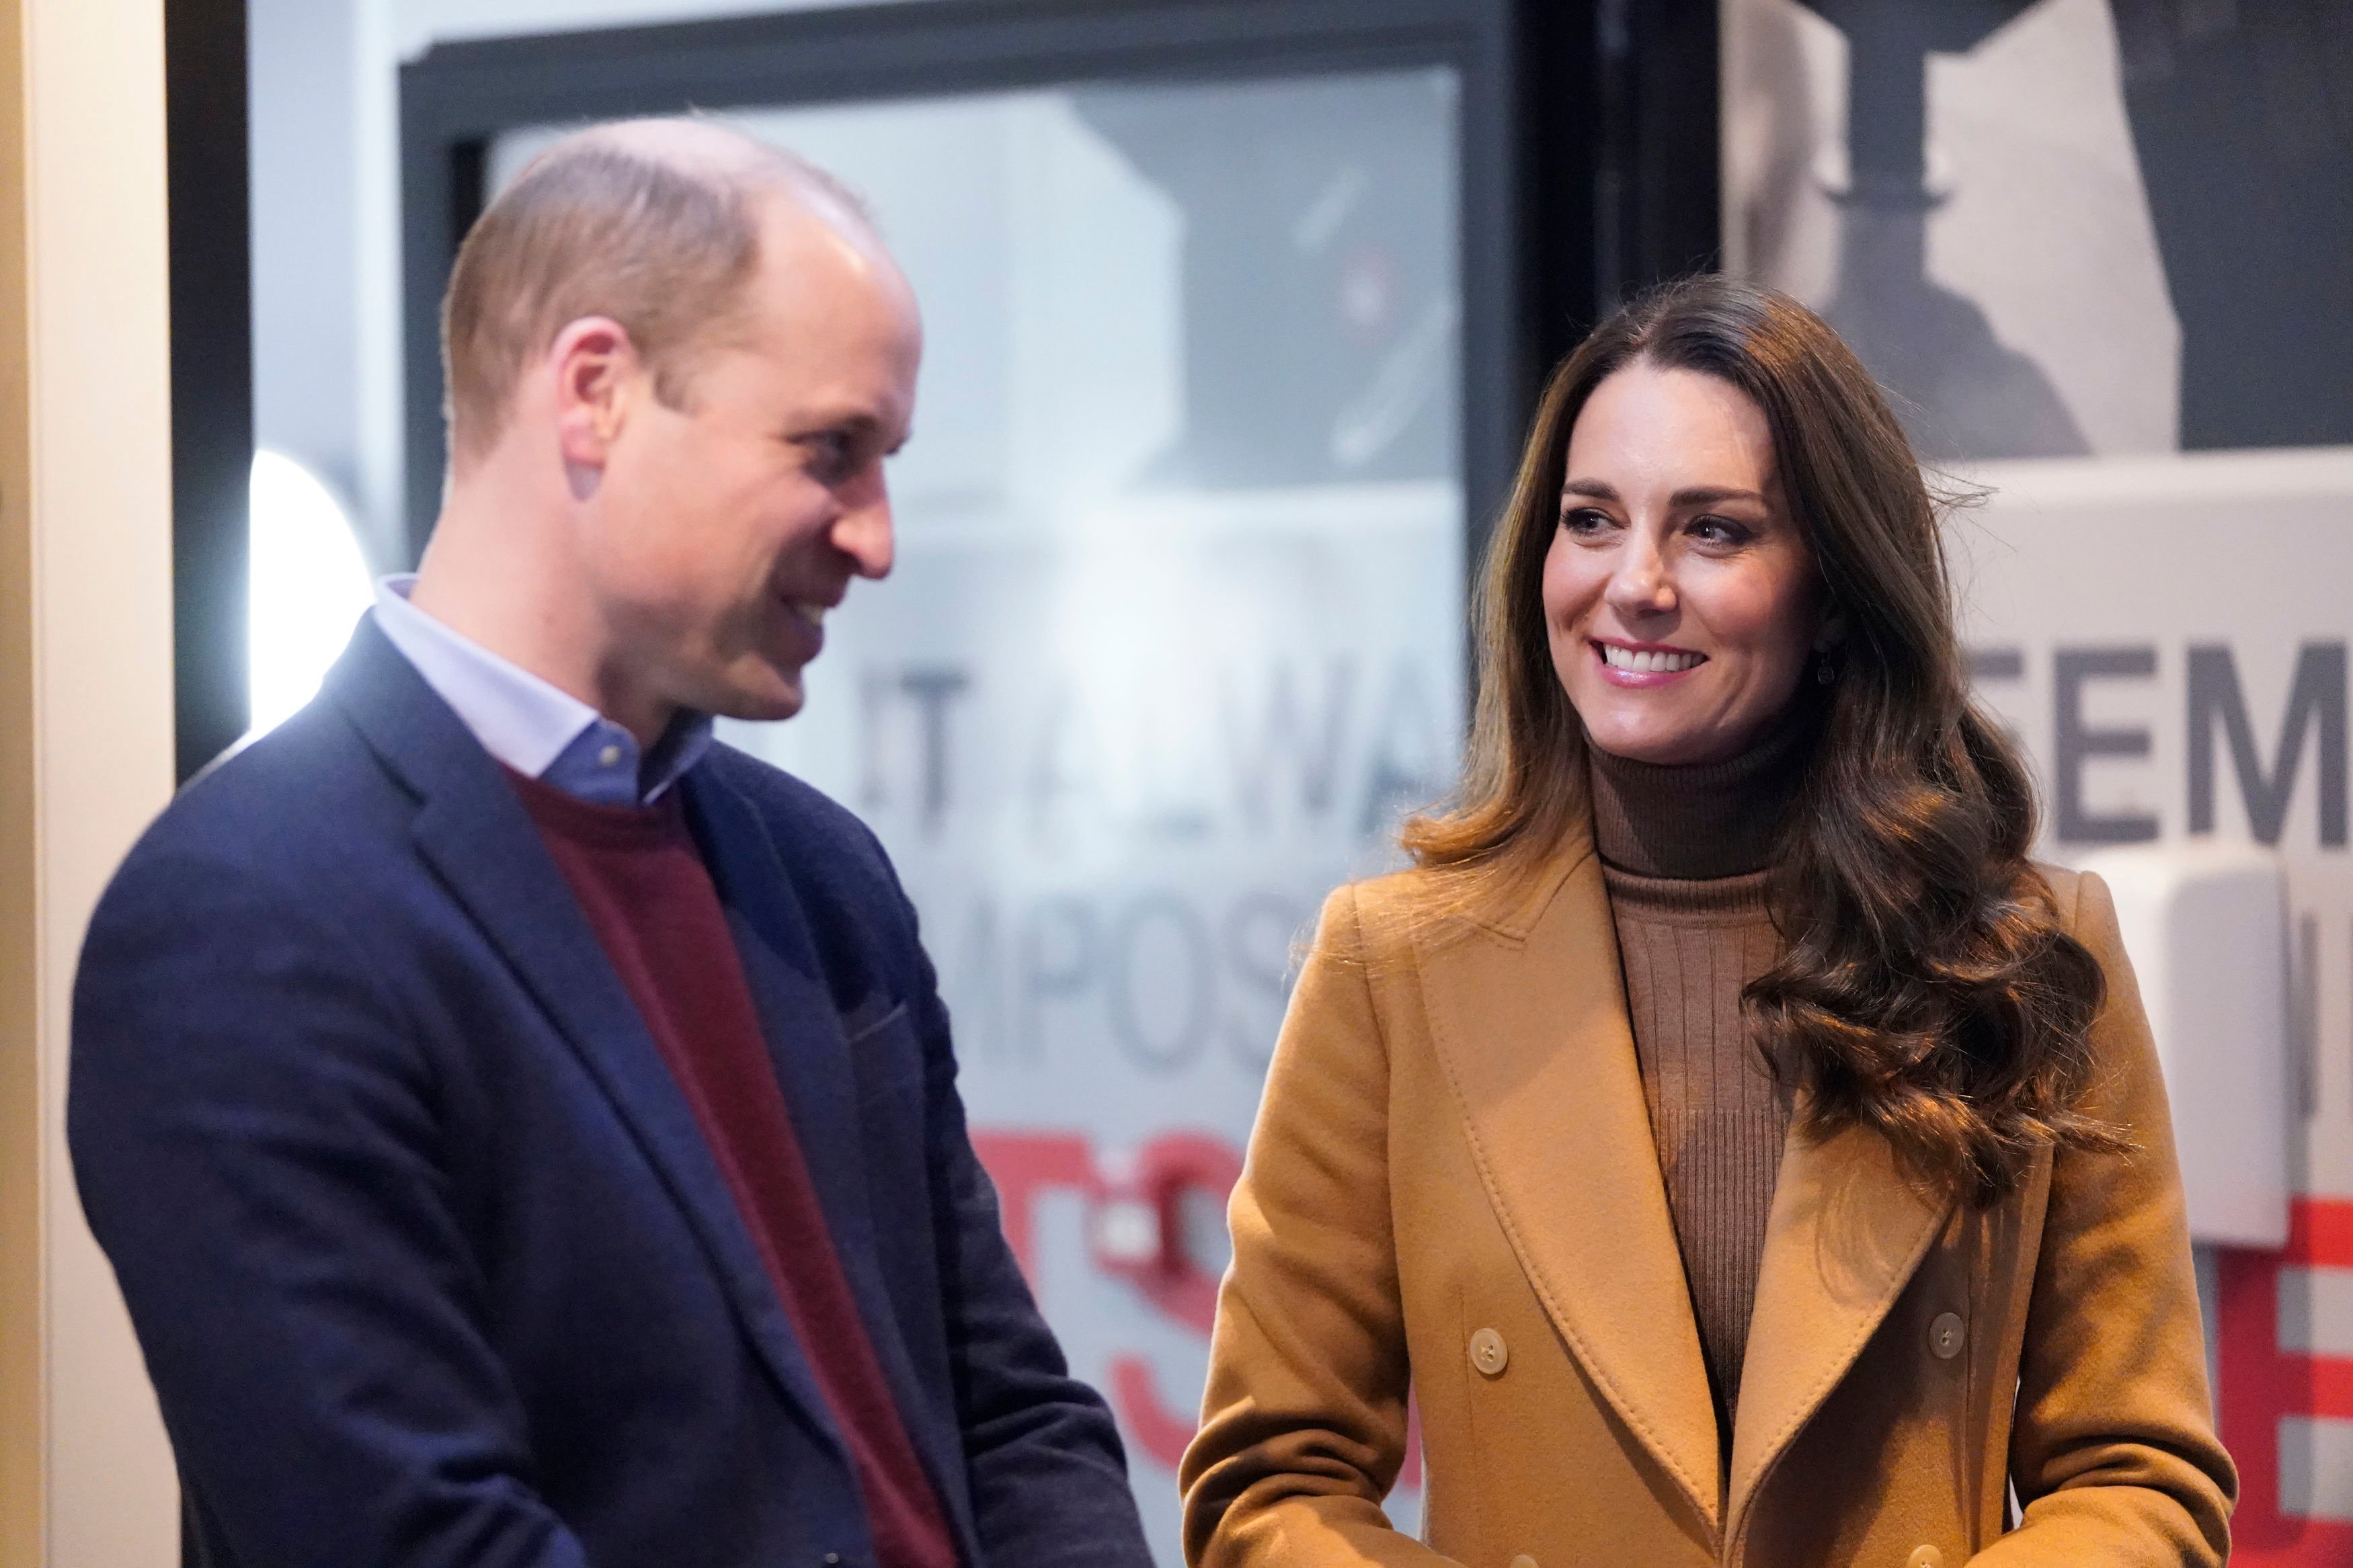 Prince William wearing a navy jacket and Kate Middleton in a beige coat during a visit to the Church on the Street in Burnley, England